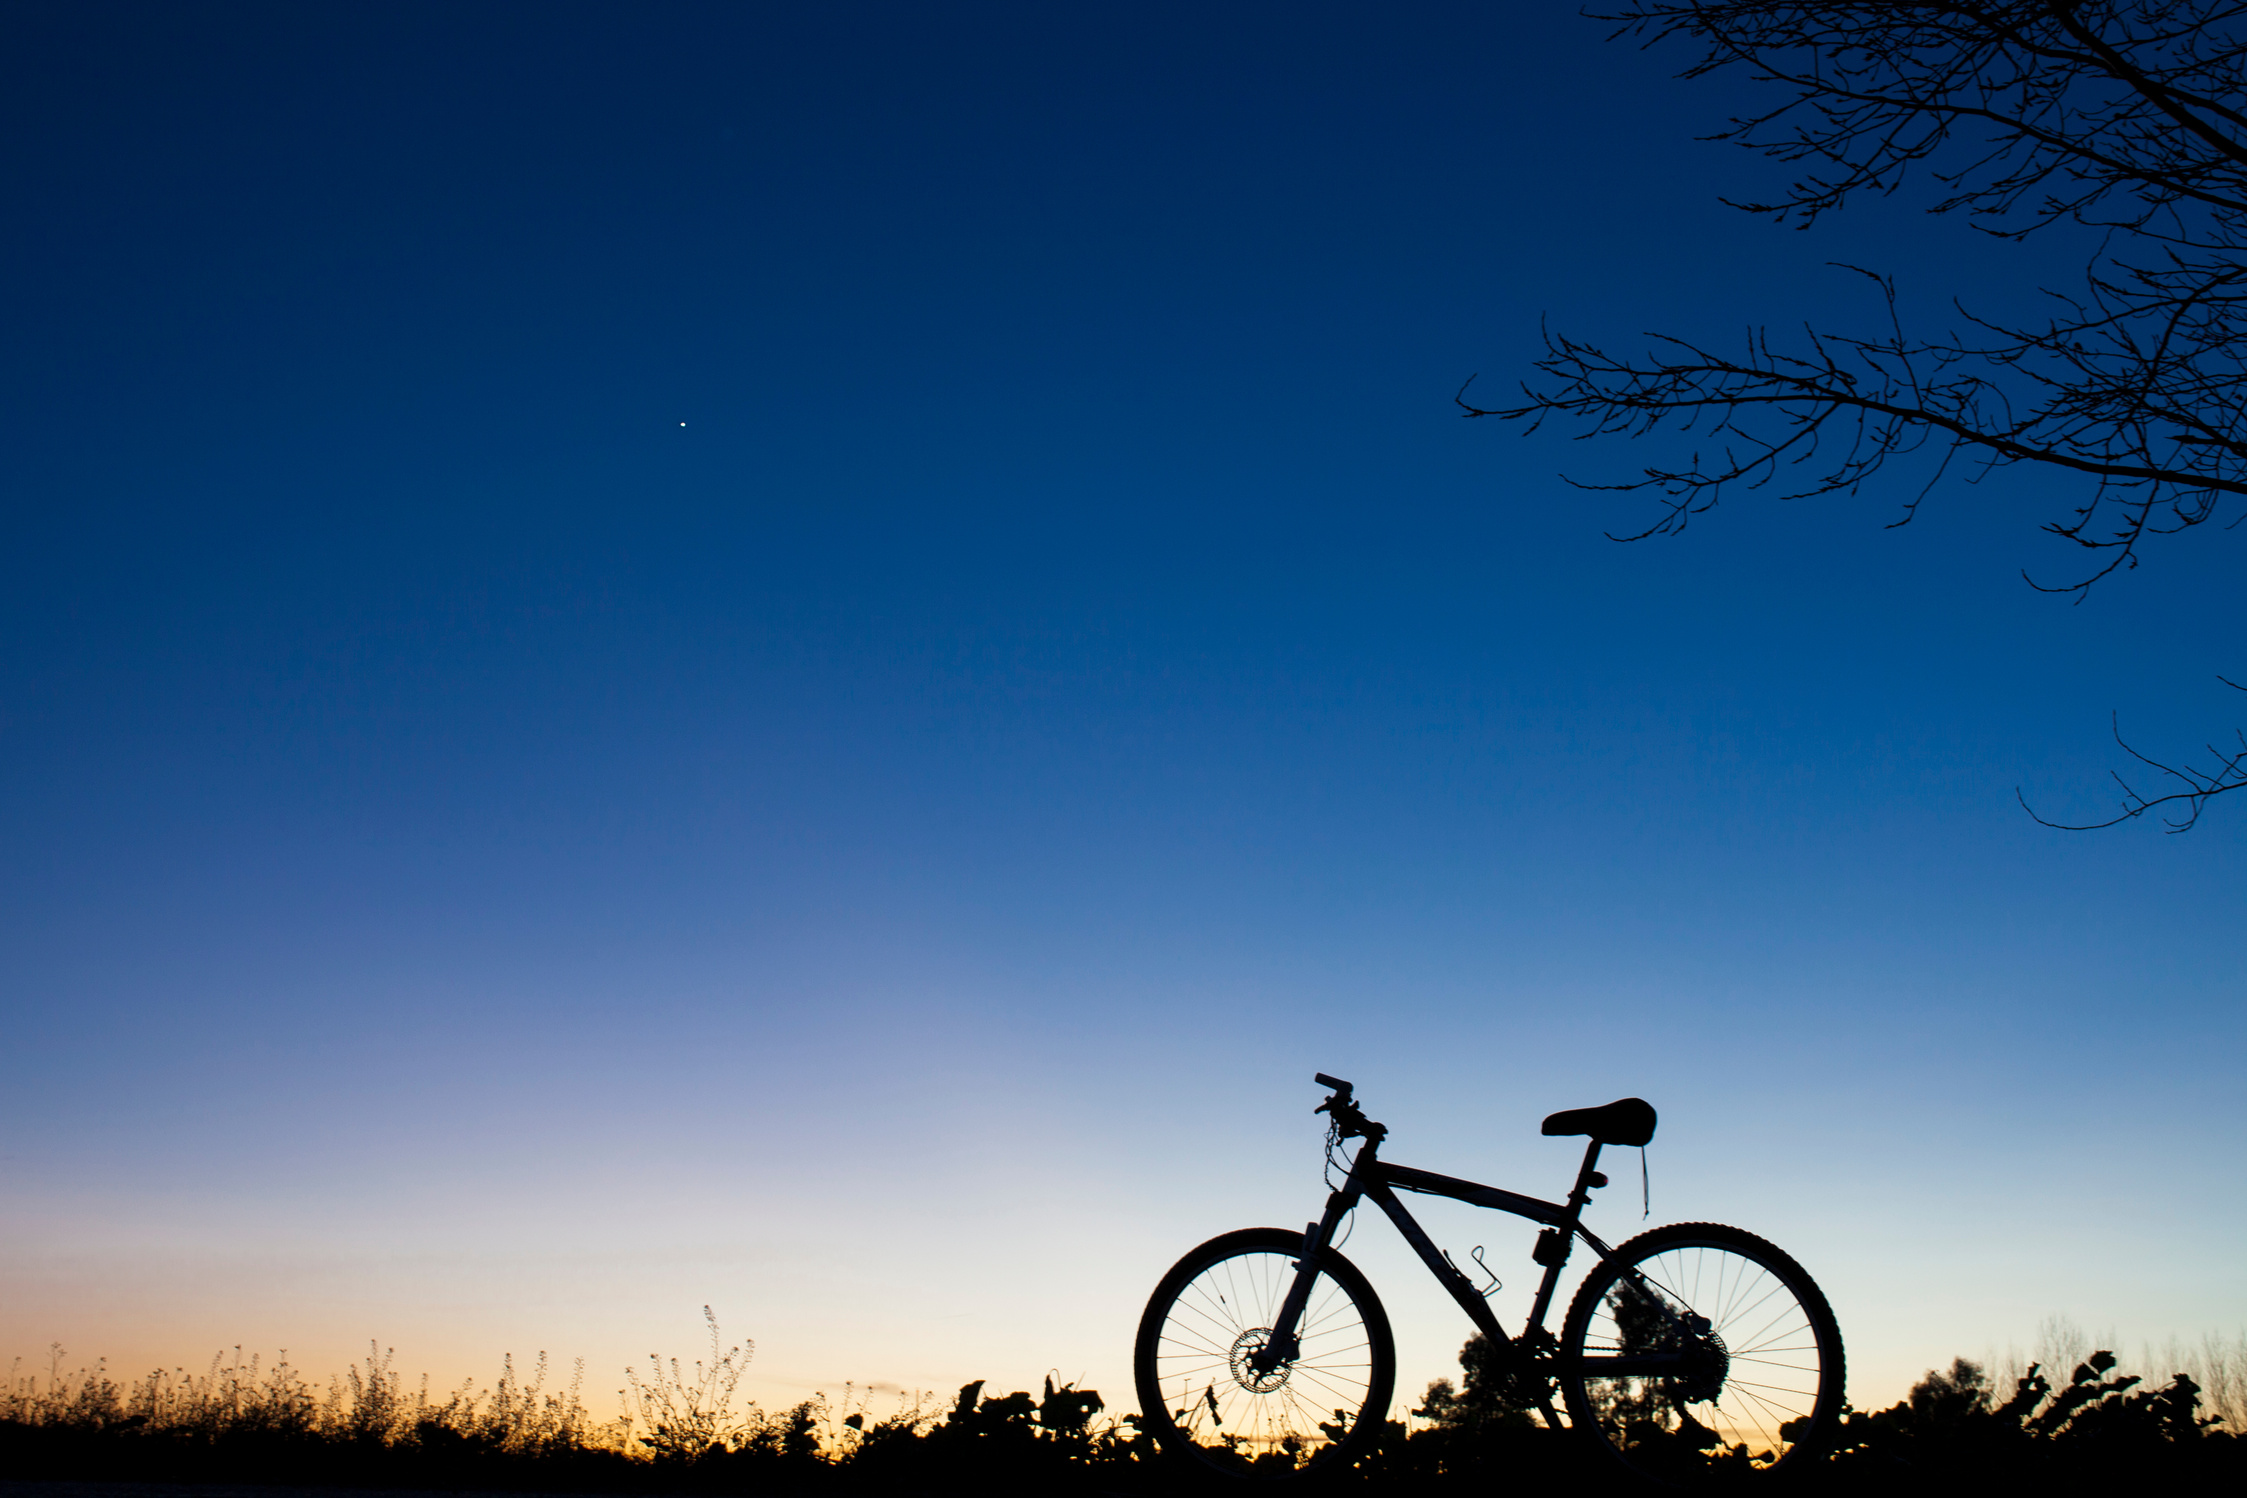 Silhouette of Mountain bike at sunset